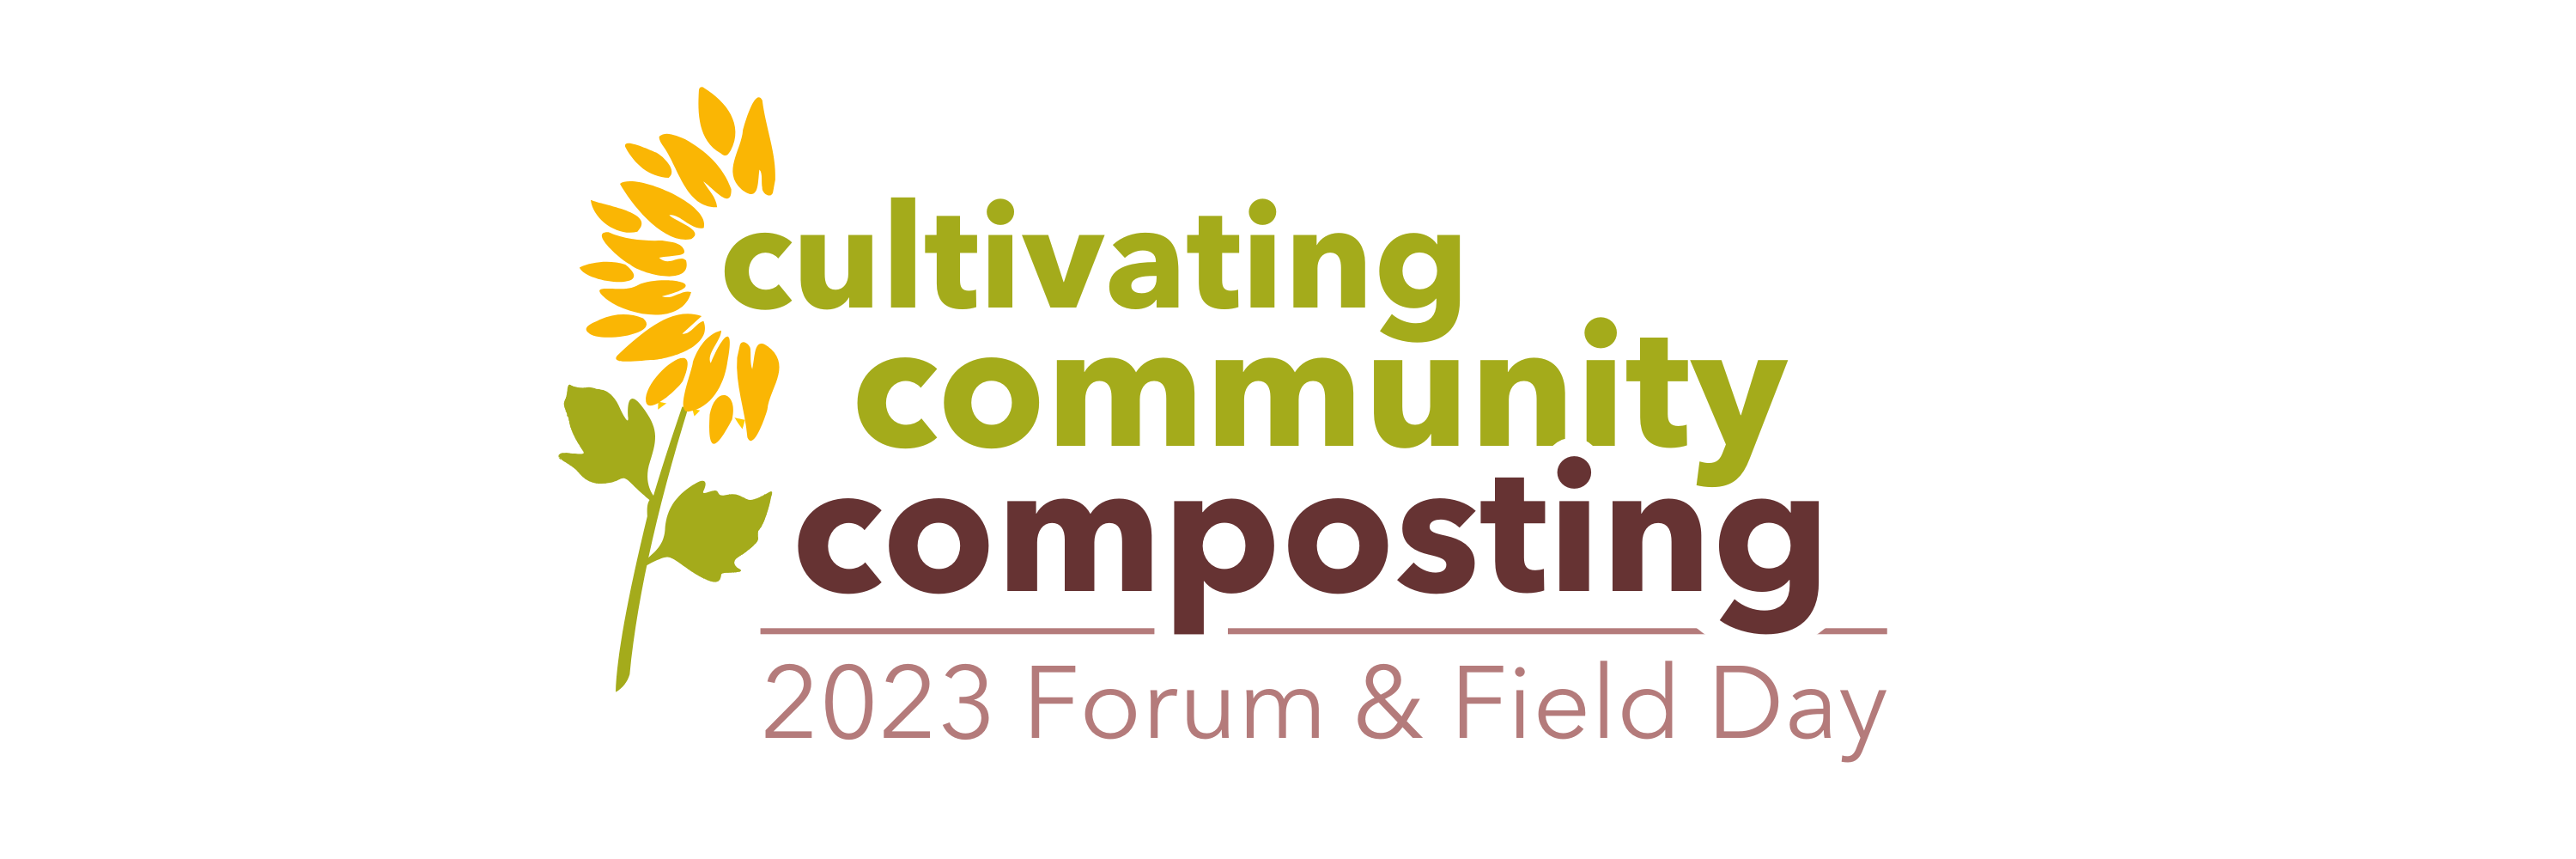 Cultivating Community Composting 2023 Forum & Field Day Logo (with sunflower design)